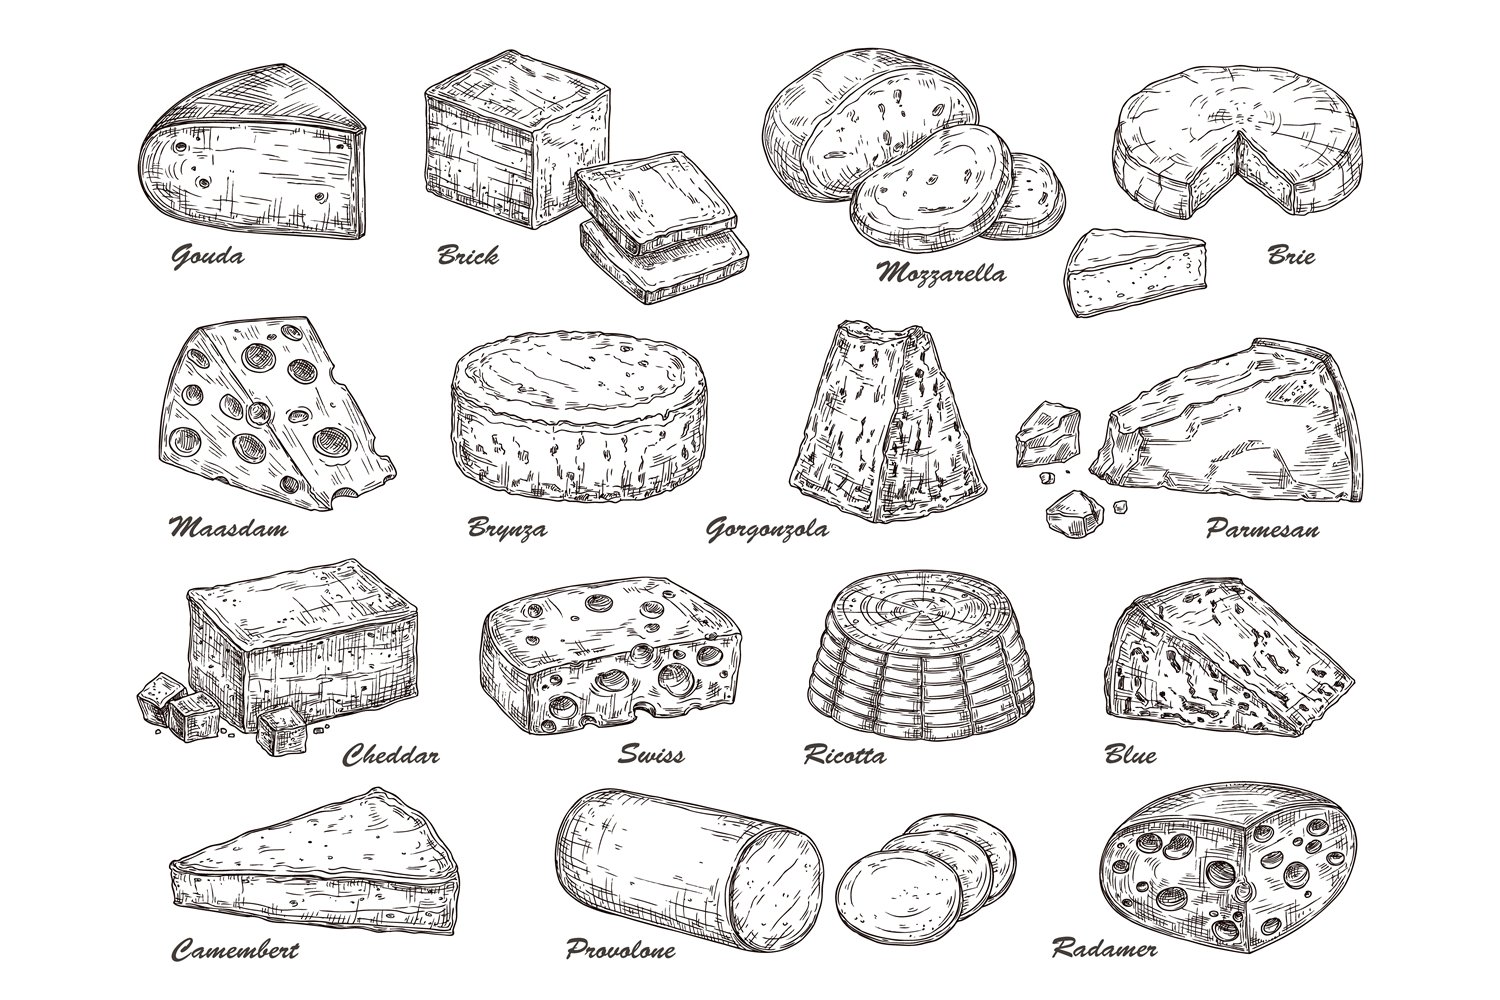 A set of adorable hand-drawn images of hard cheeses.